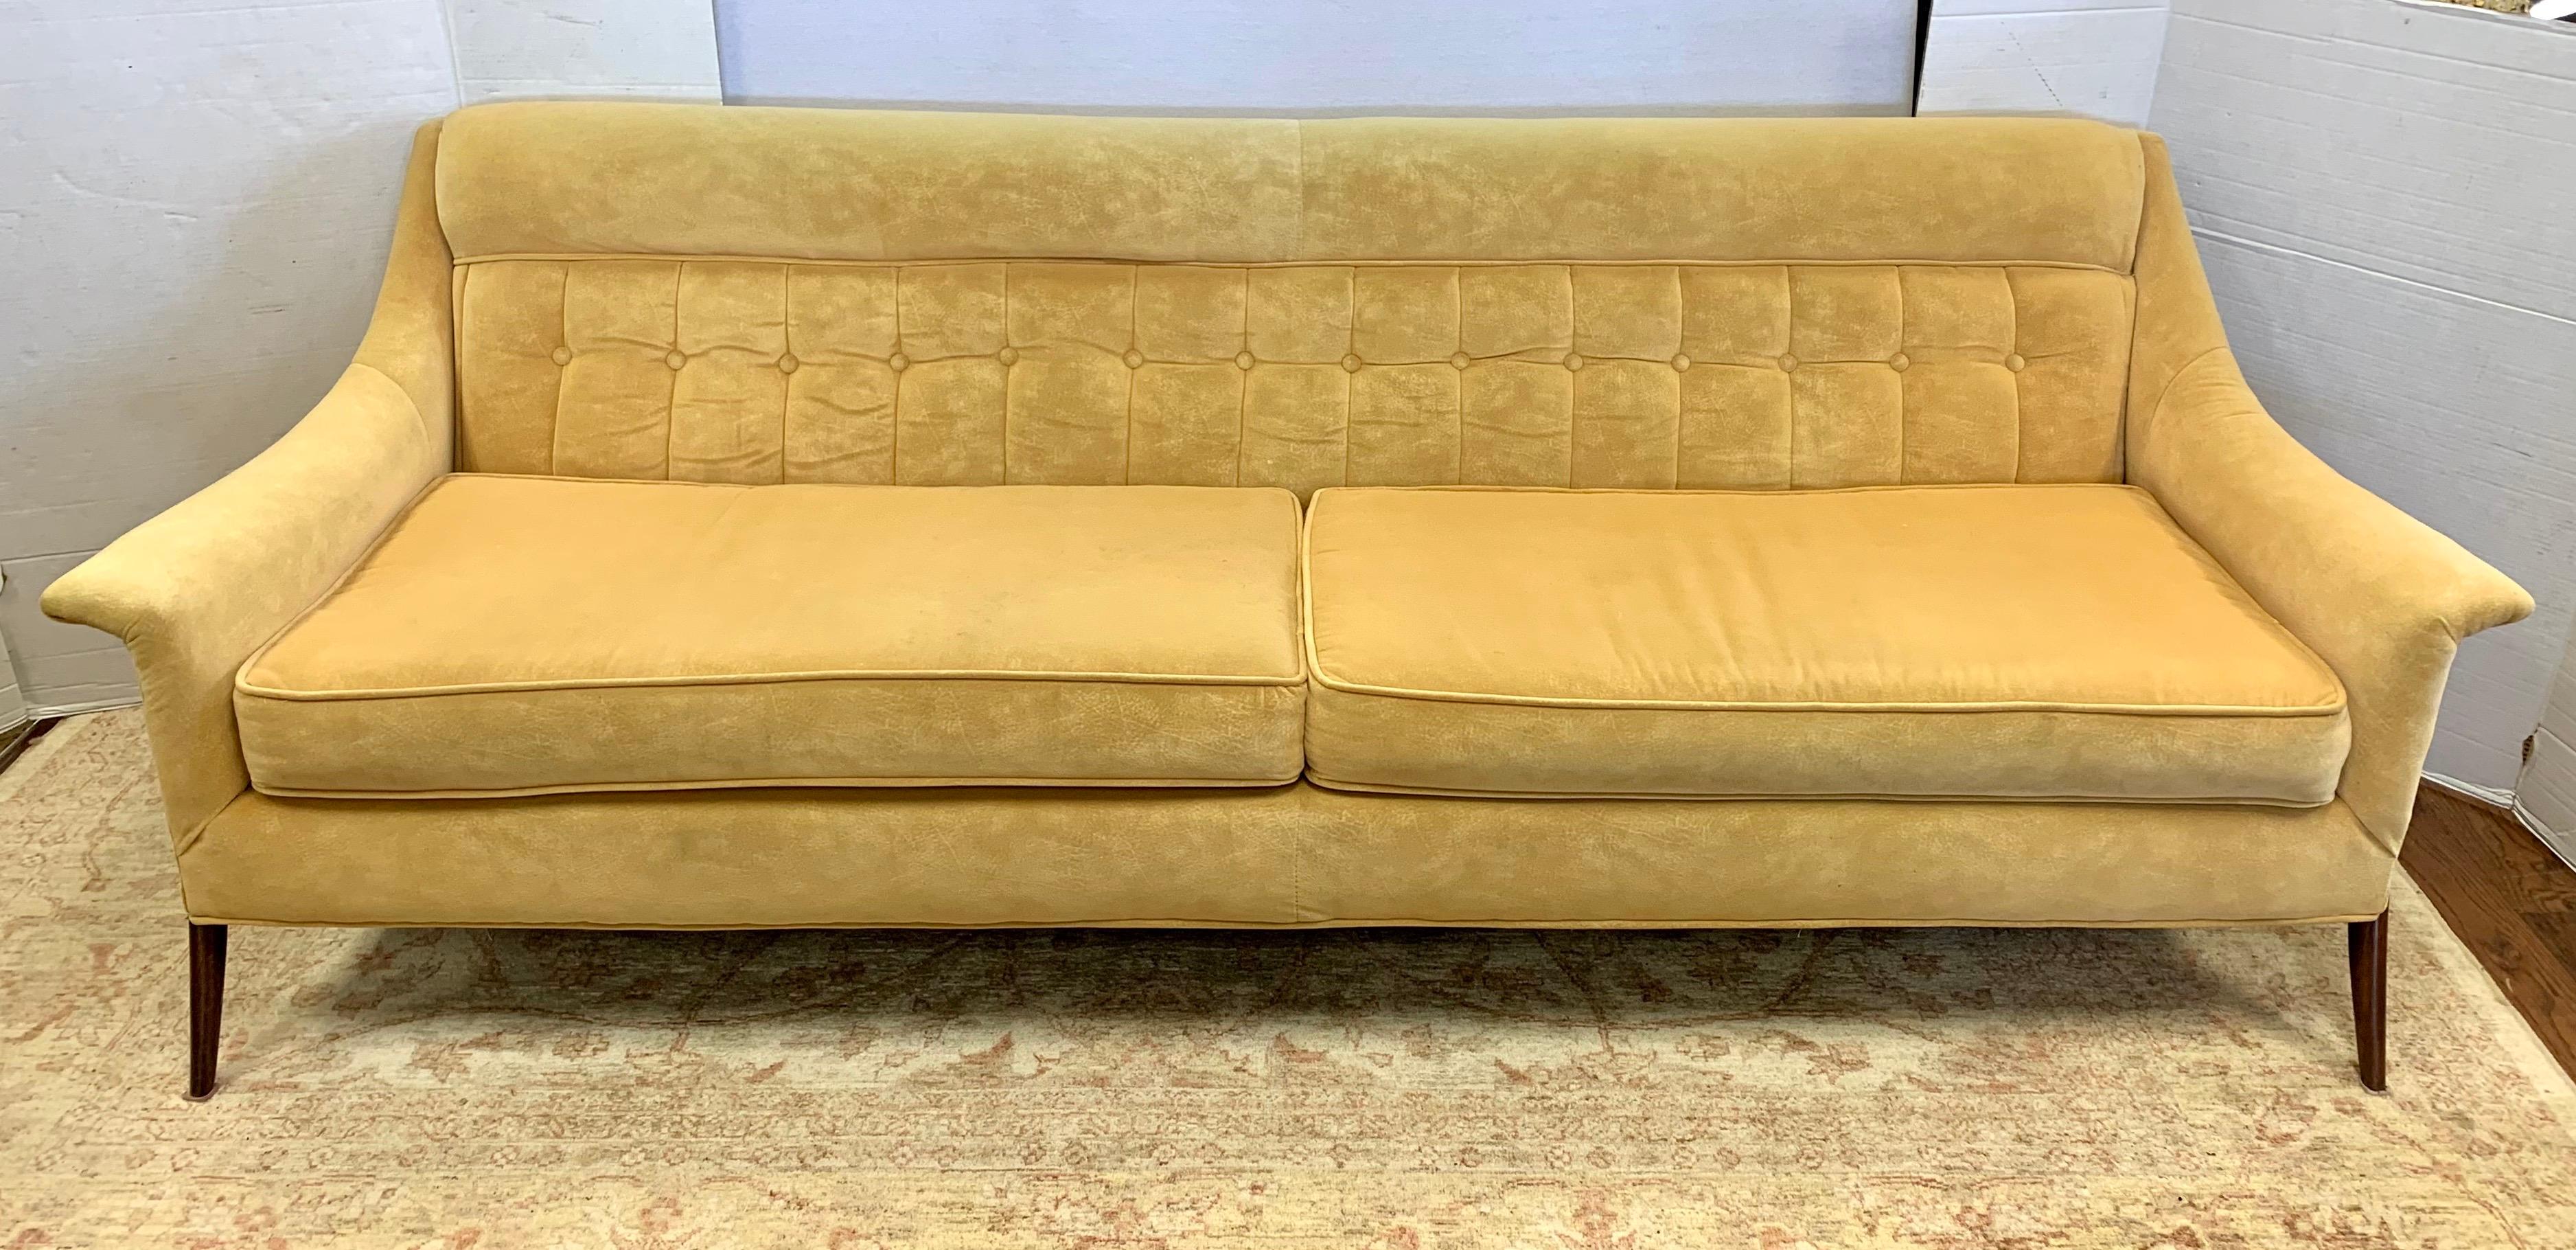 Midcentury Danish Modern Tufted Sculptural Sofa with Ultra Suede Fabric 3